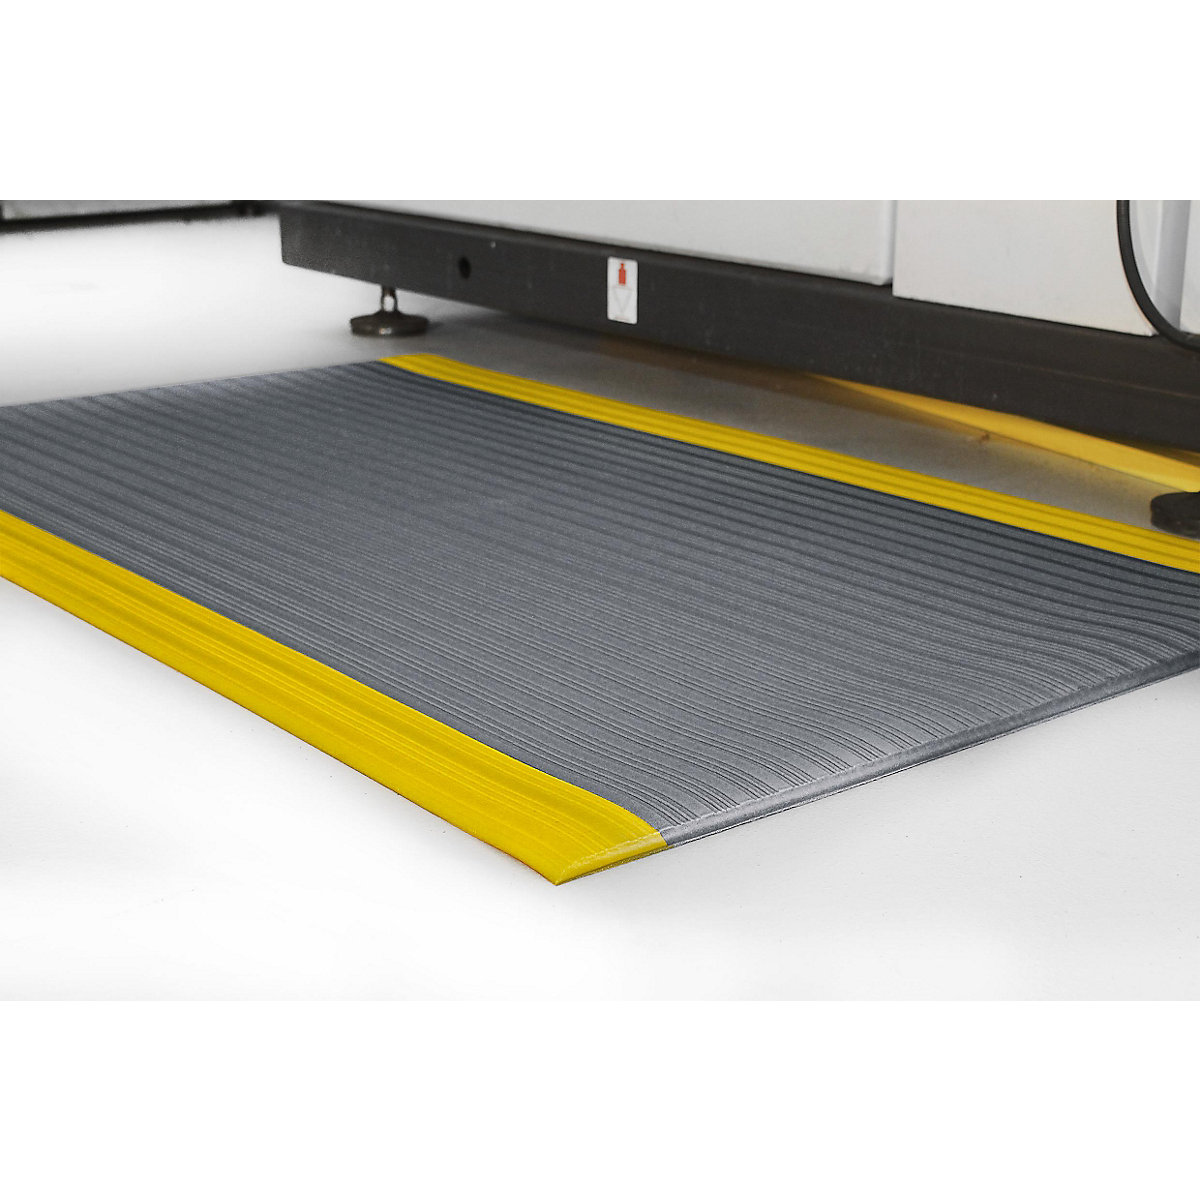 Orthomat® Ribbed anti-fatigue matting, width 910 mm, per m, grey with high visibility stripes